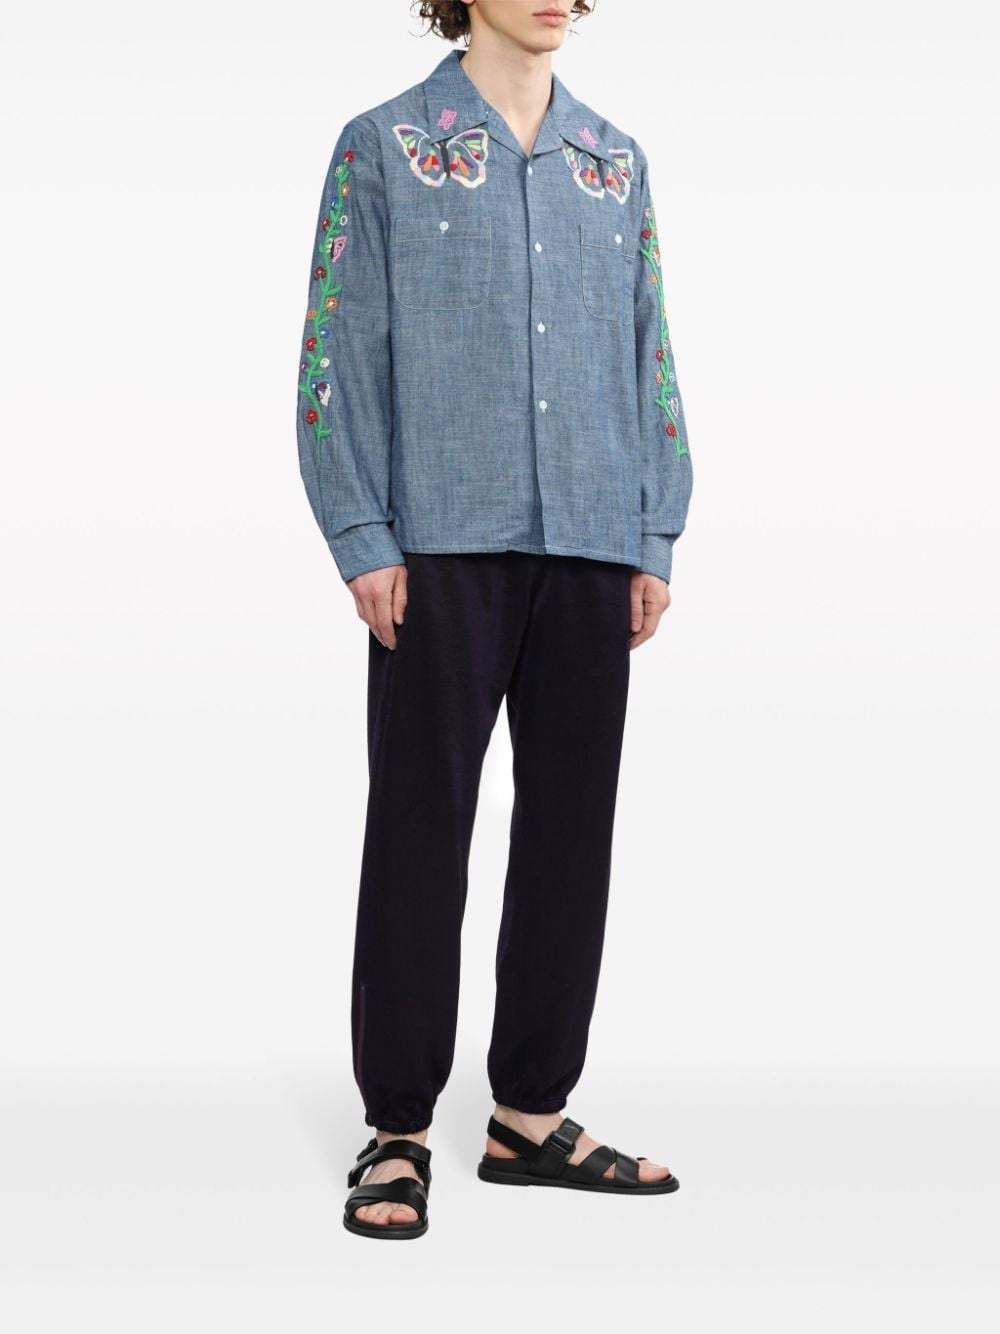 embroidered western shirt - 2